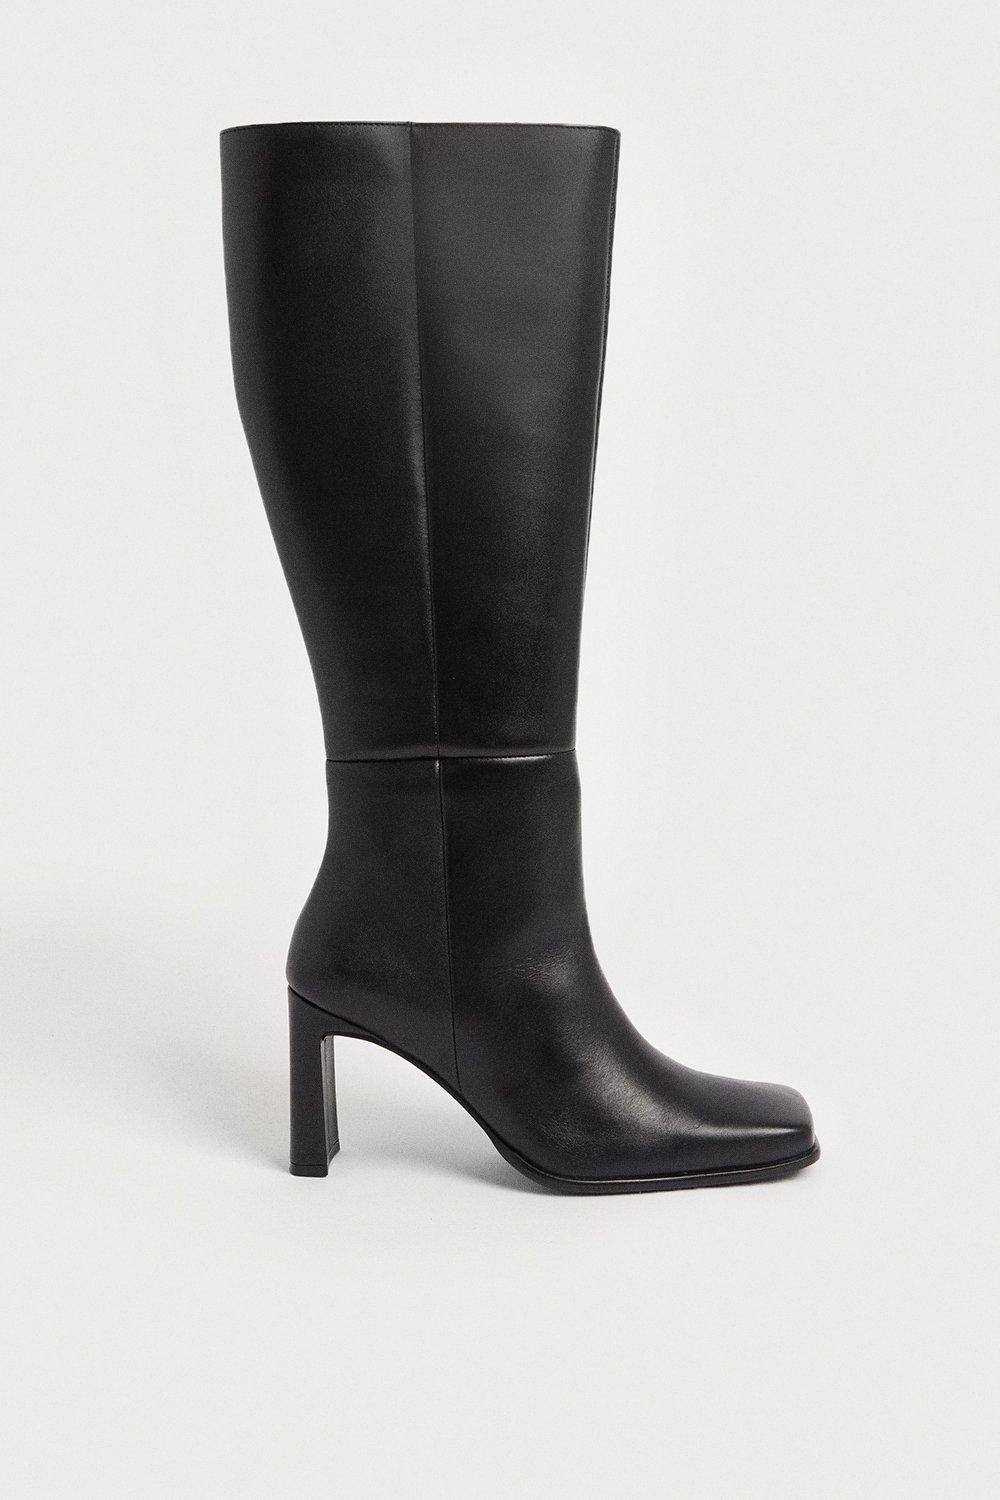 Premium Leather Squared Toe Knee High Boots | Warehouse UK & IE